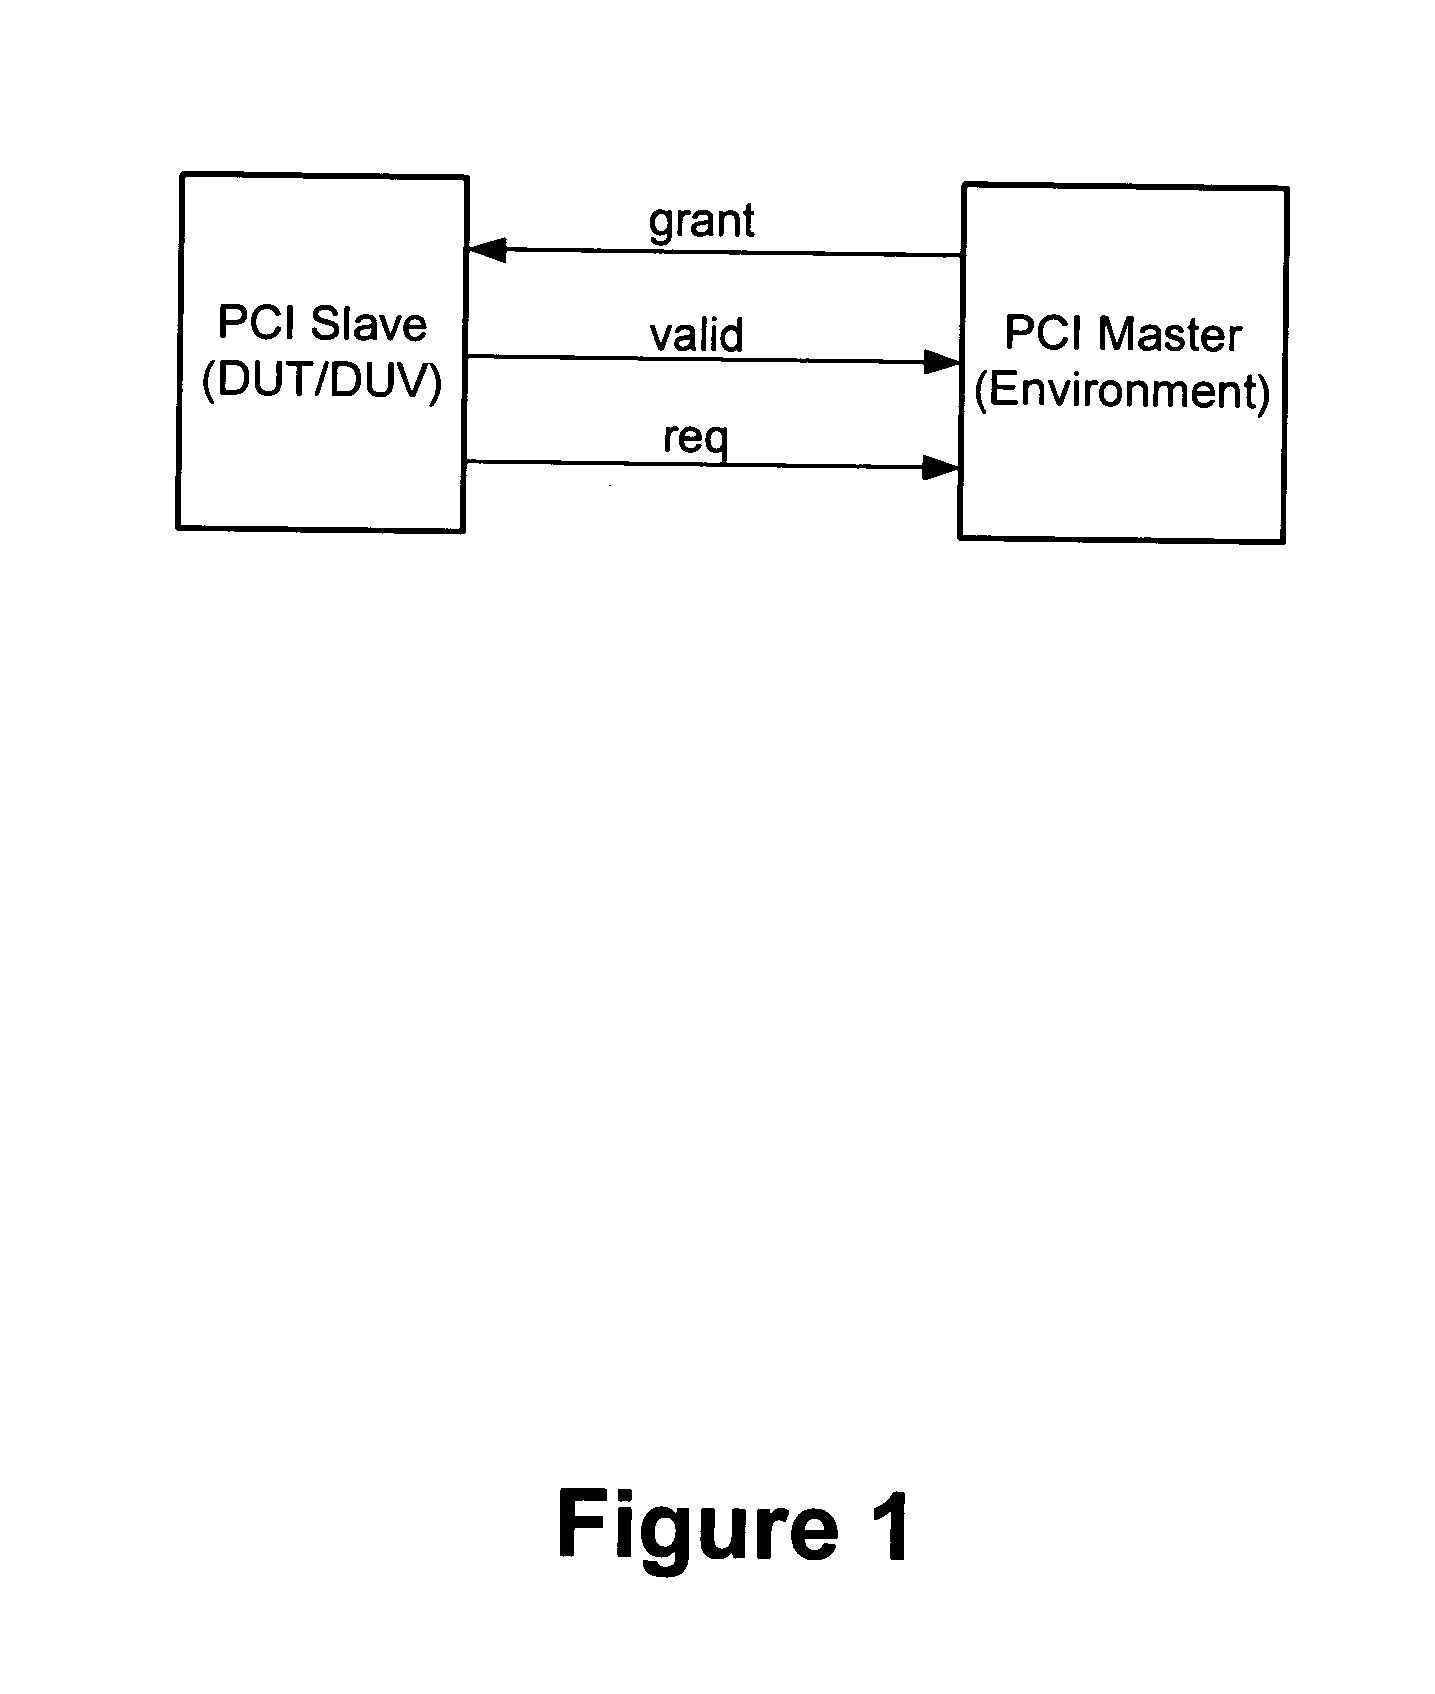 Method and apparatus for solving sequential constraints